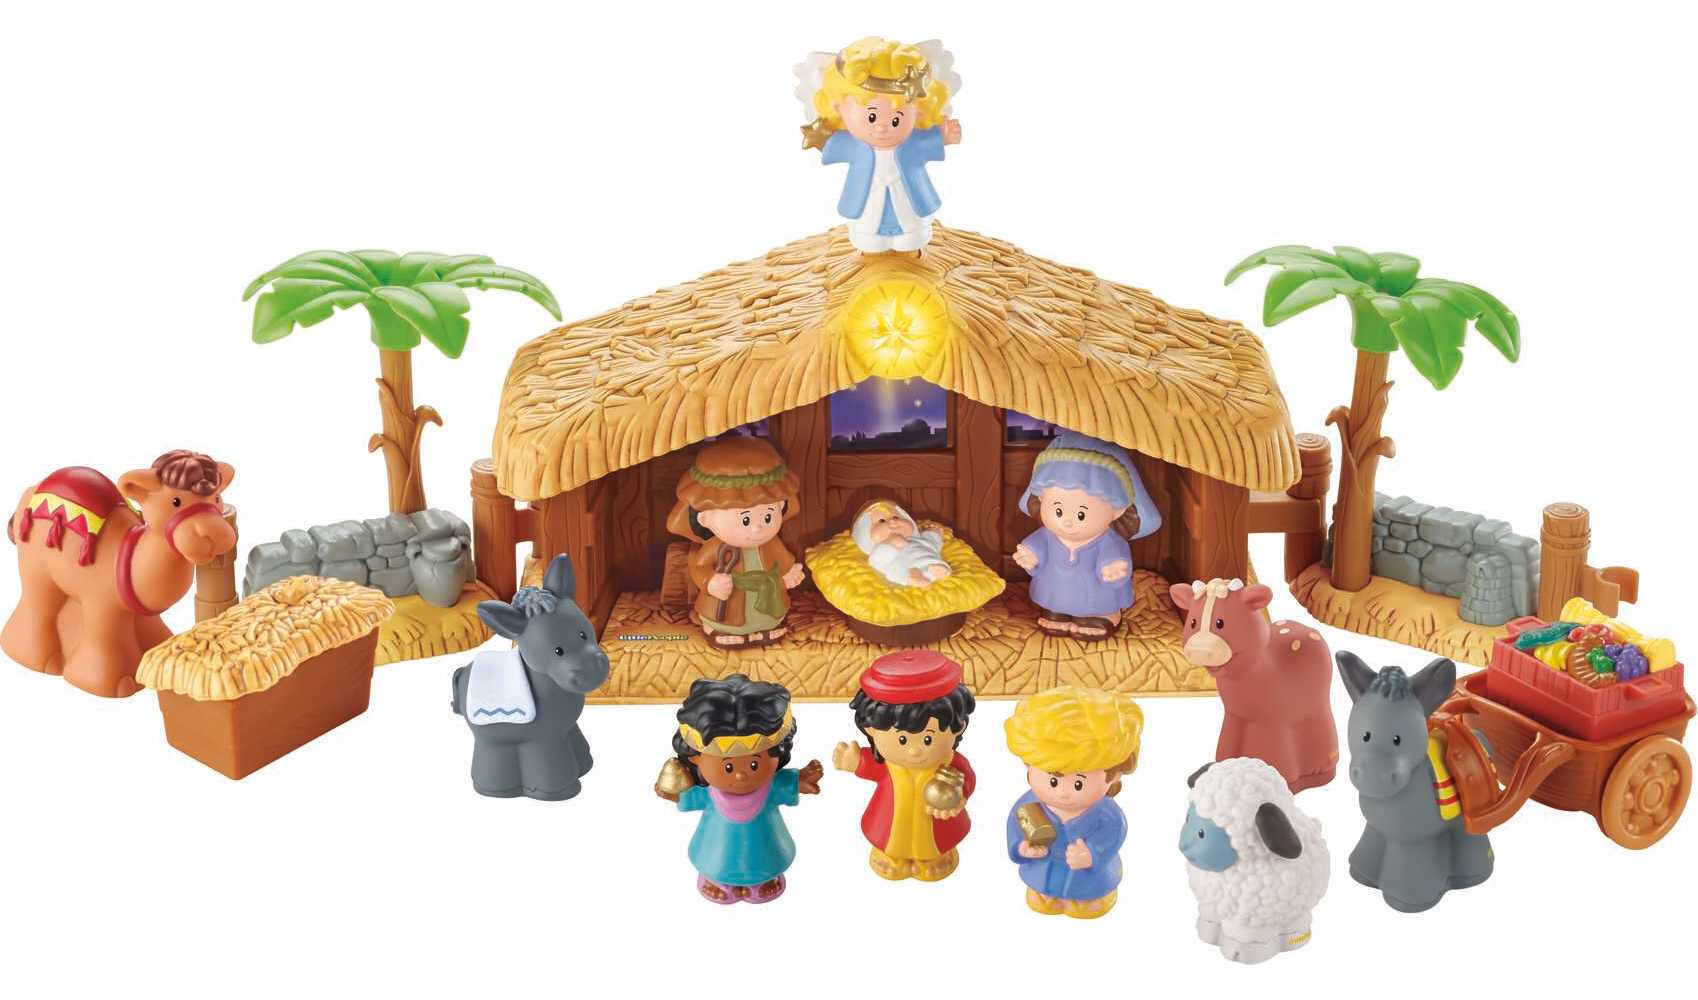 Little People Deluxe Christmas Story, Nativity Playset, Toddler Toys - image 1 of 6